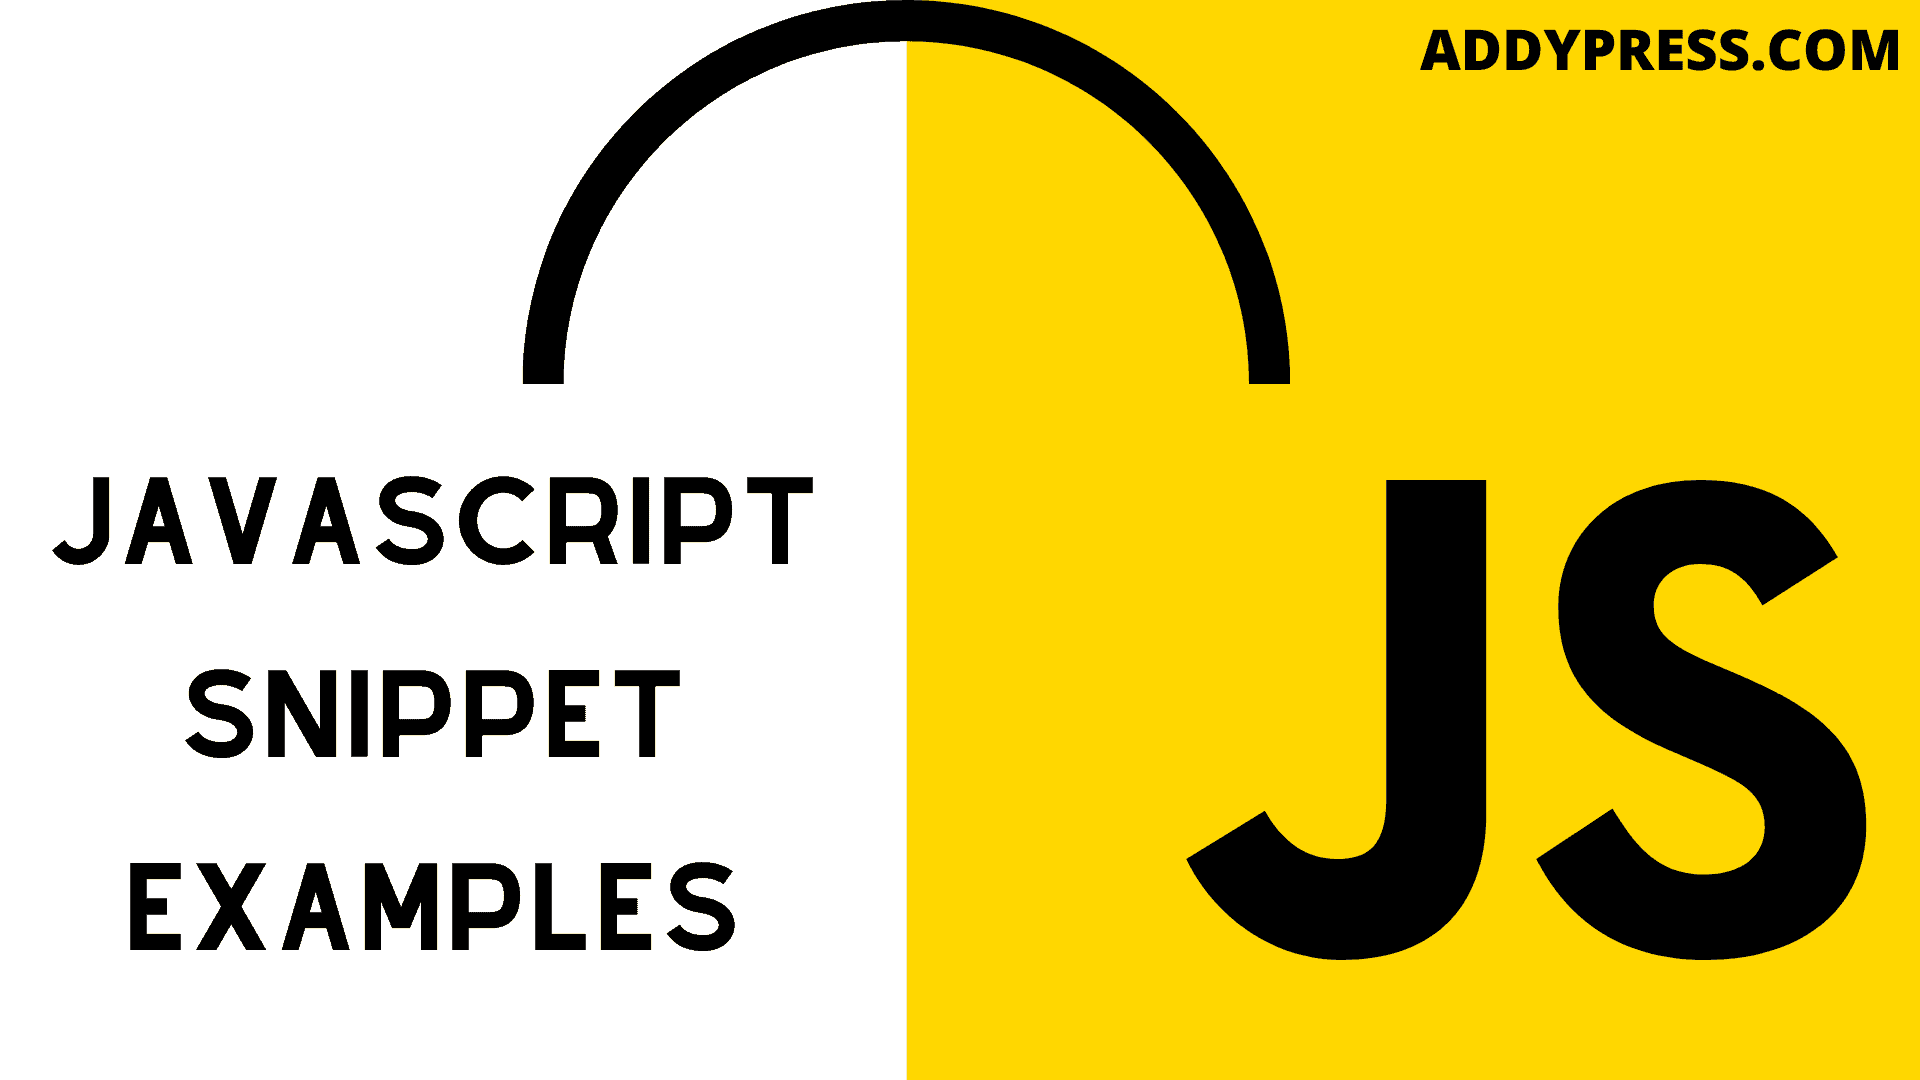 Javascript snippet examples